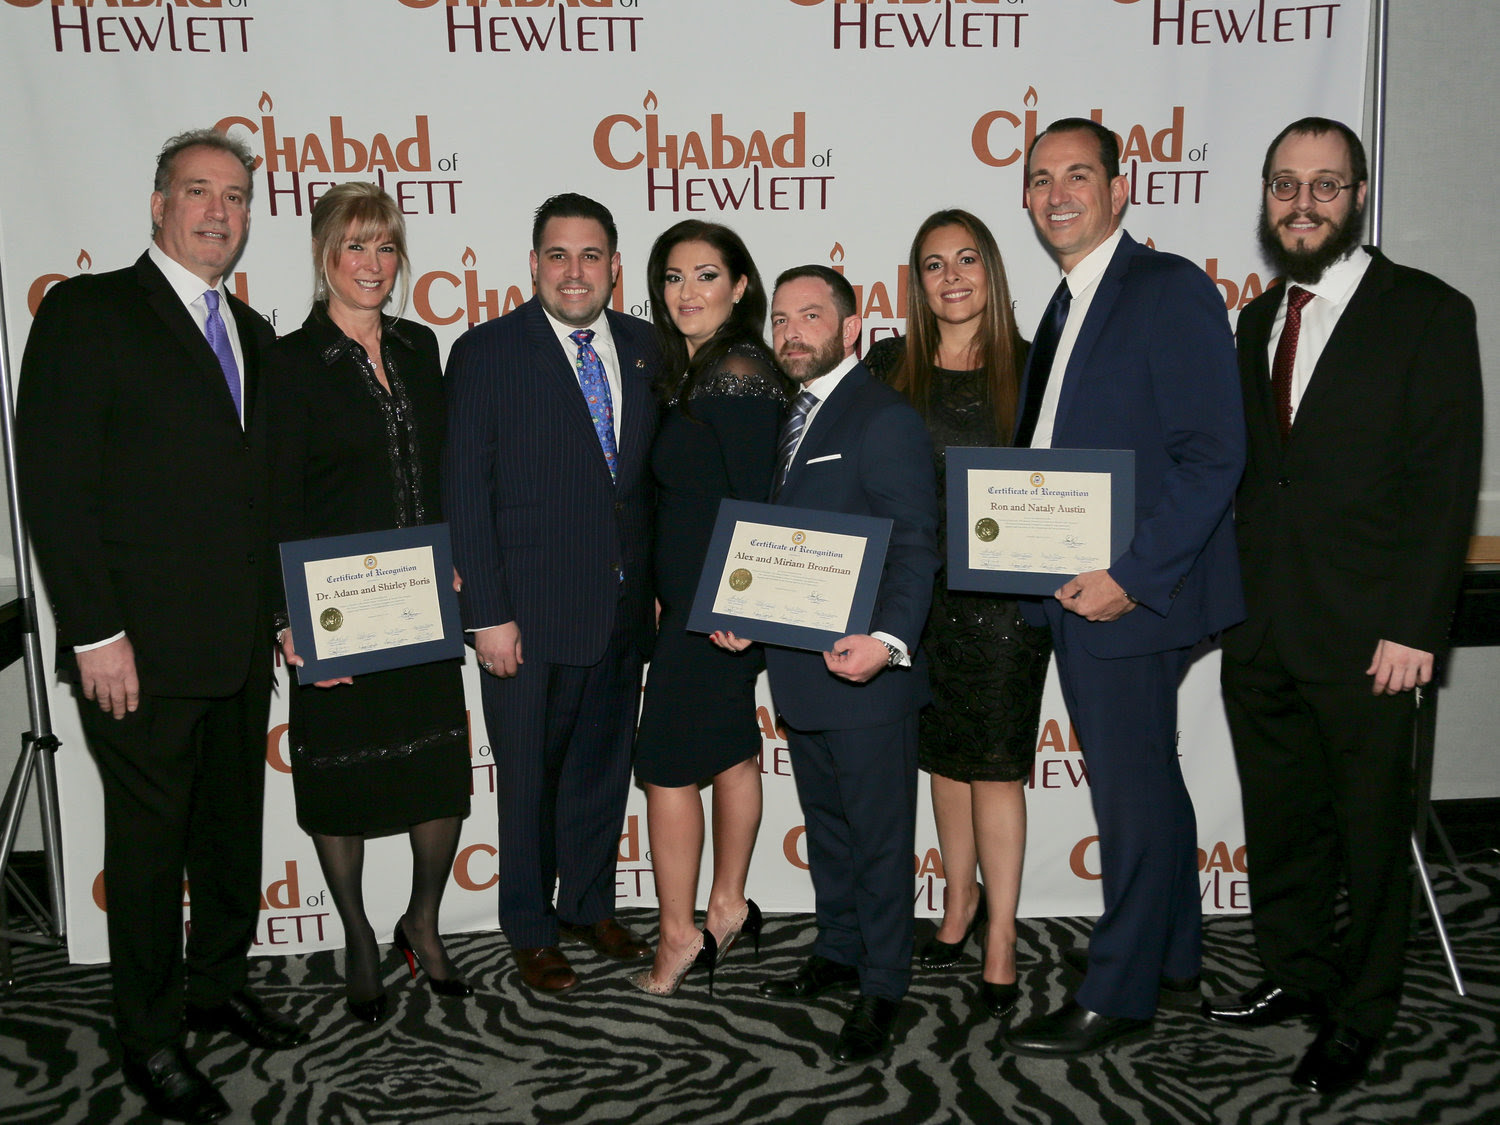 Town of Hempstead Councilman Anthony D’Esposito presented certificates of recognition to the Chabad of Hewlett honorees. From left were Dr. Adam and Shirley Boris, D’Esposito, Miriam and Alex Bronfman and Nataly and Ron Austin, and Rabbi Nochem Tenenboim.